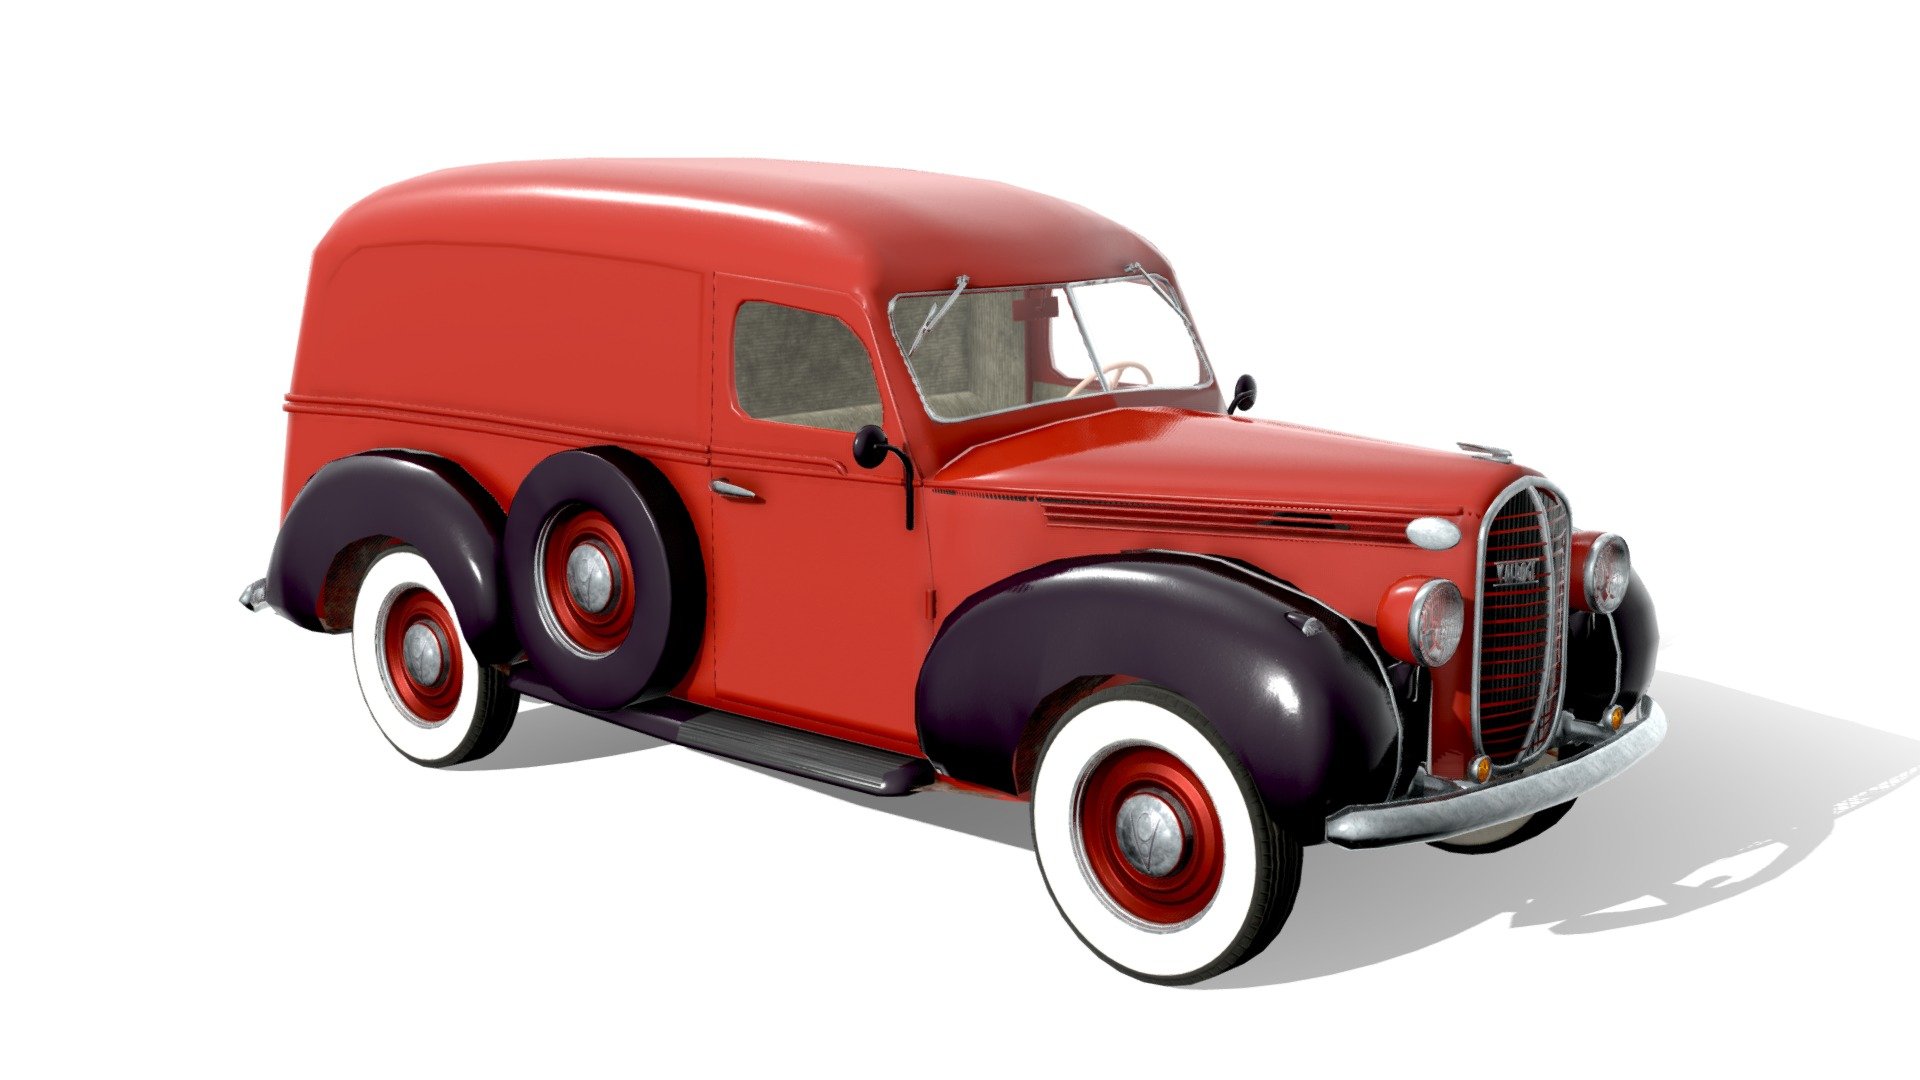 1938 Ford V8 truck based van, branded as Vairogs (Lat: ‘shield’) for the Latvian market. 3D model based on my previous works, below 50k tris, low poly tyres and wheels. .zip file contains all textures and a .blend file. Model is not triangulized, so if you wish, it should be easy to modify it!

If you wish to request a custom model, or have any questions, email me at libaumedia@outlook.com Thank you, Robin of Libau Media 3d model